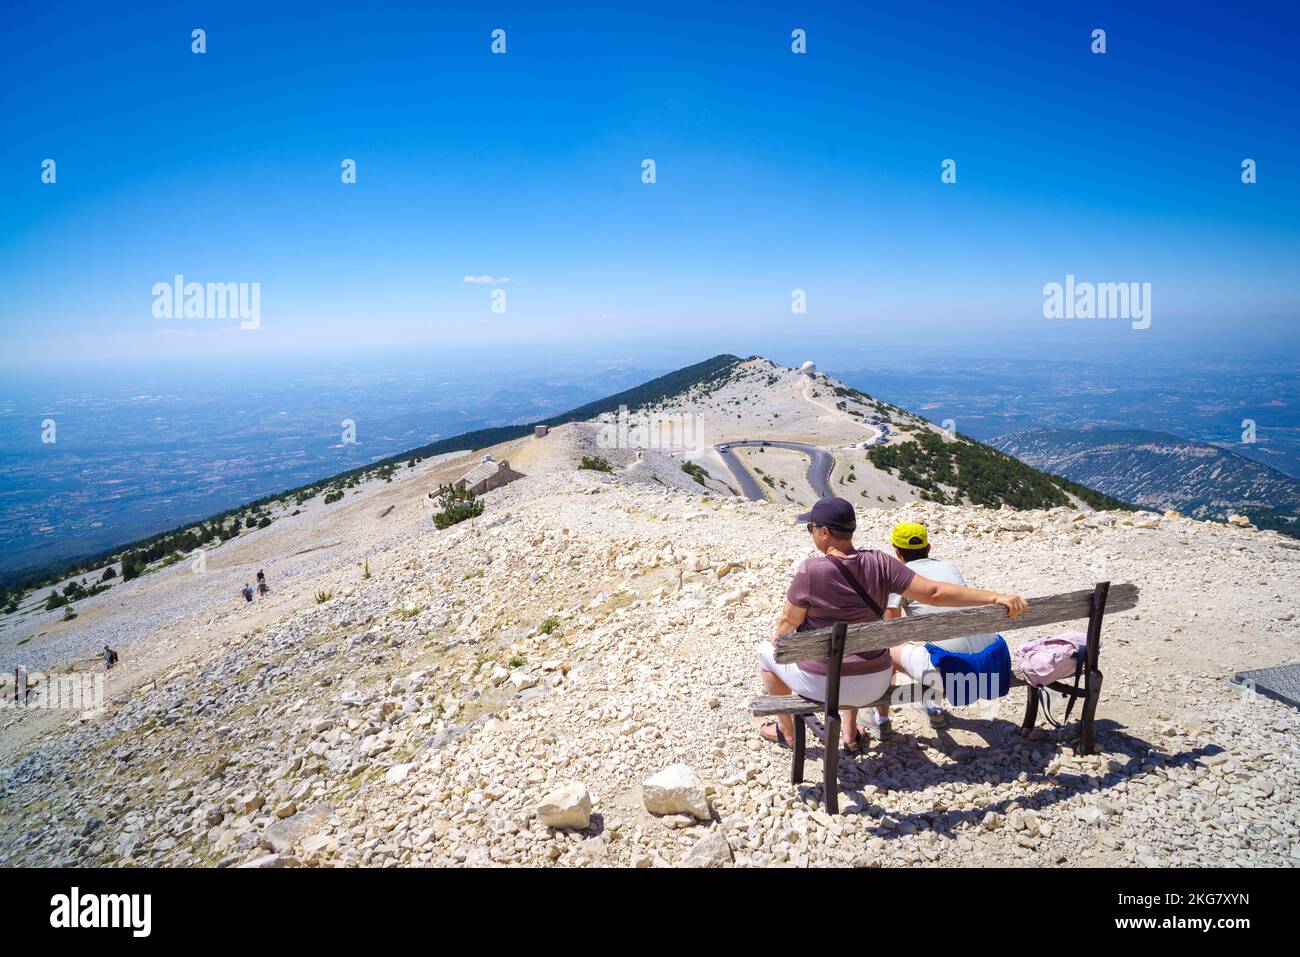 BEDOIN, FRANCE - AUGUST 7, 2022: People sitting on a weathered bench. At 1,909 m (6,263 ft), it is the highest mountain in the region and has been nic Stock Photo